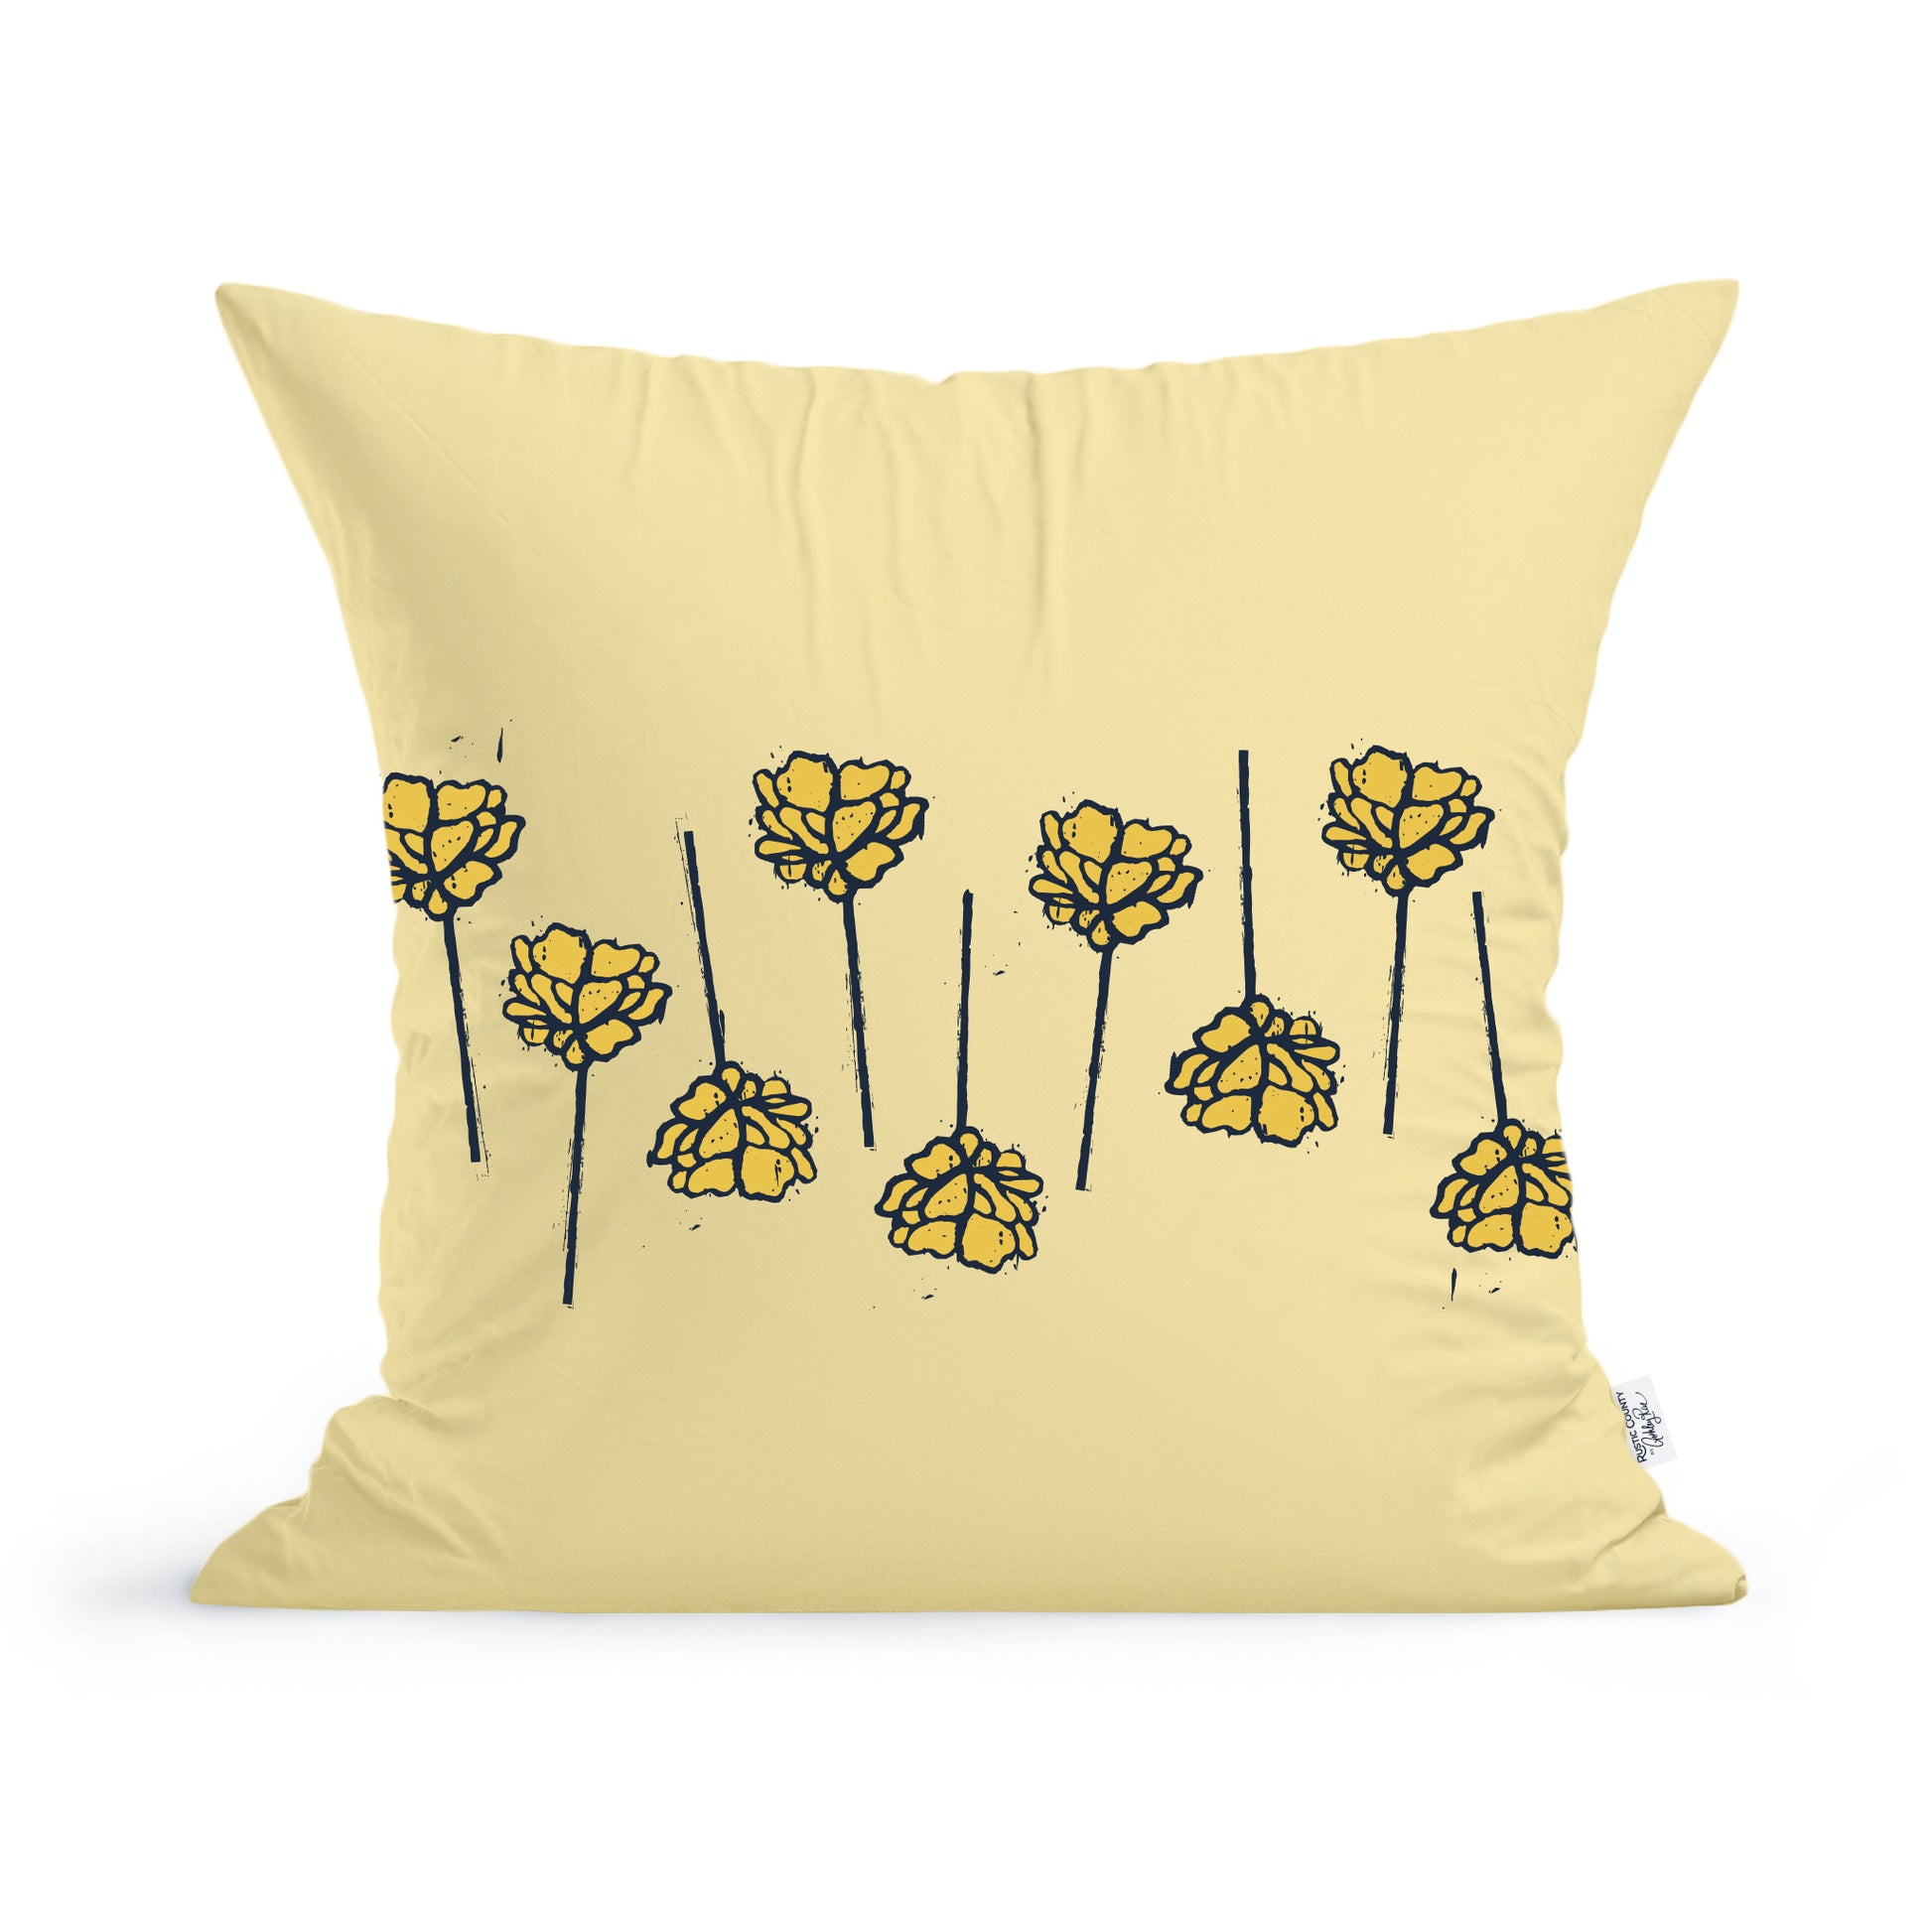 A pale yellow Fresh Florals Pillow by Rustic County featuring a stylized black and yellow Fresh Florals print. The design includes several flowers on slender stems, arrayed across the pillow's face.